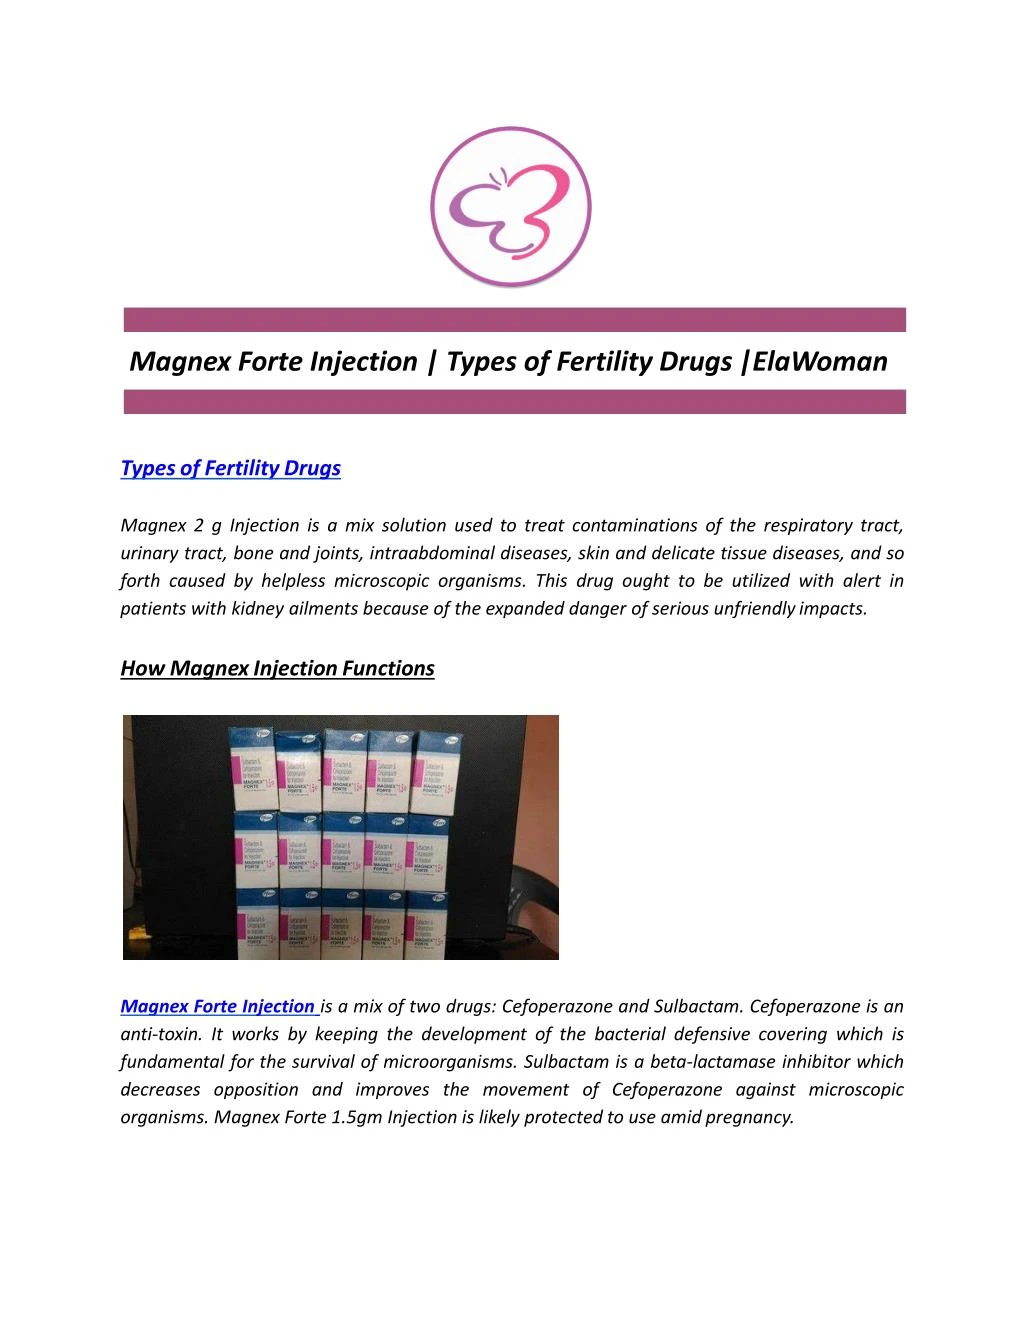 magnex forte injection types of fertility drugs